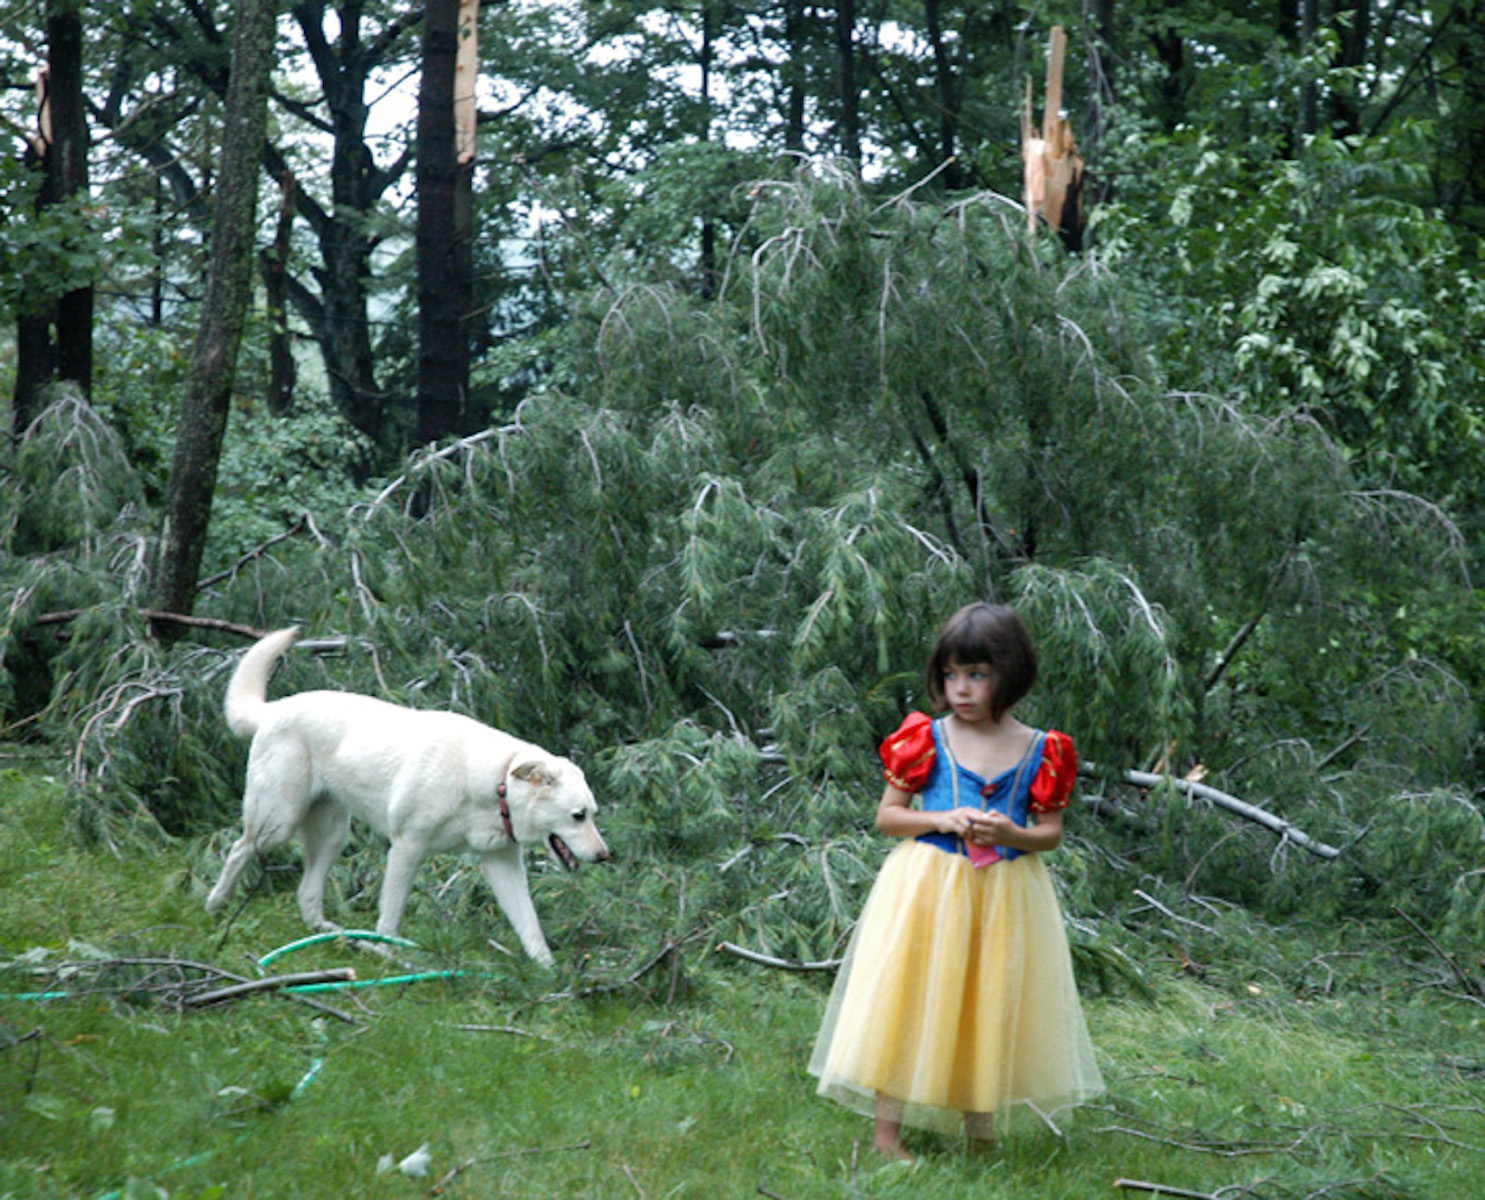 Frontyard of Nicoletti’s home, WIllimasburg, where five trees where smashed by the water. Toria Nicoletti, 5 yrs old and her dog Calgary.